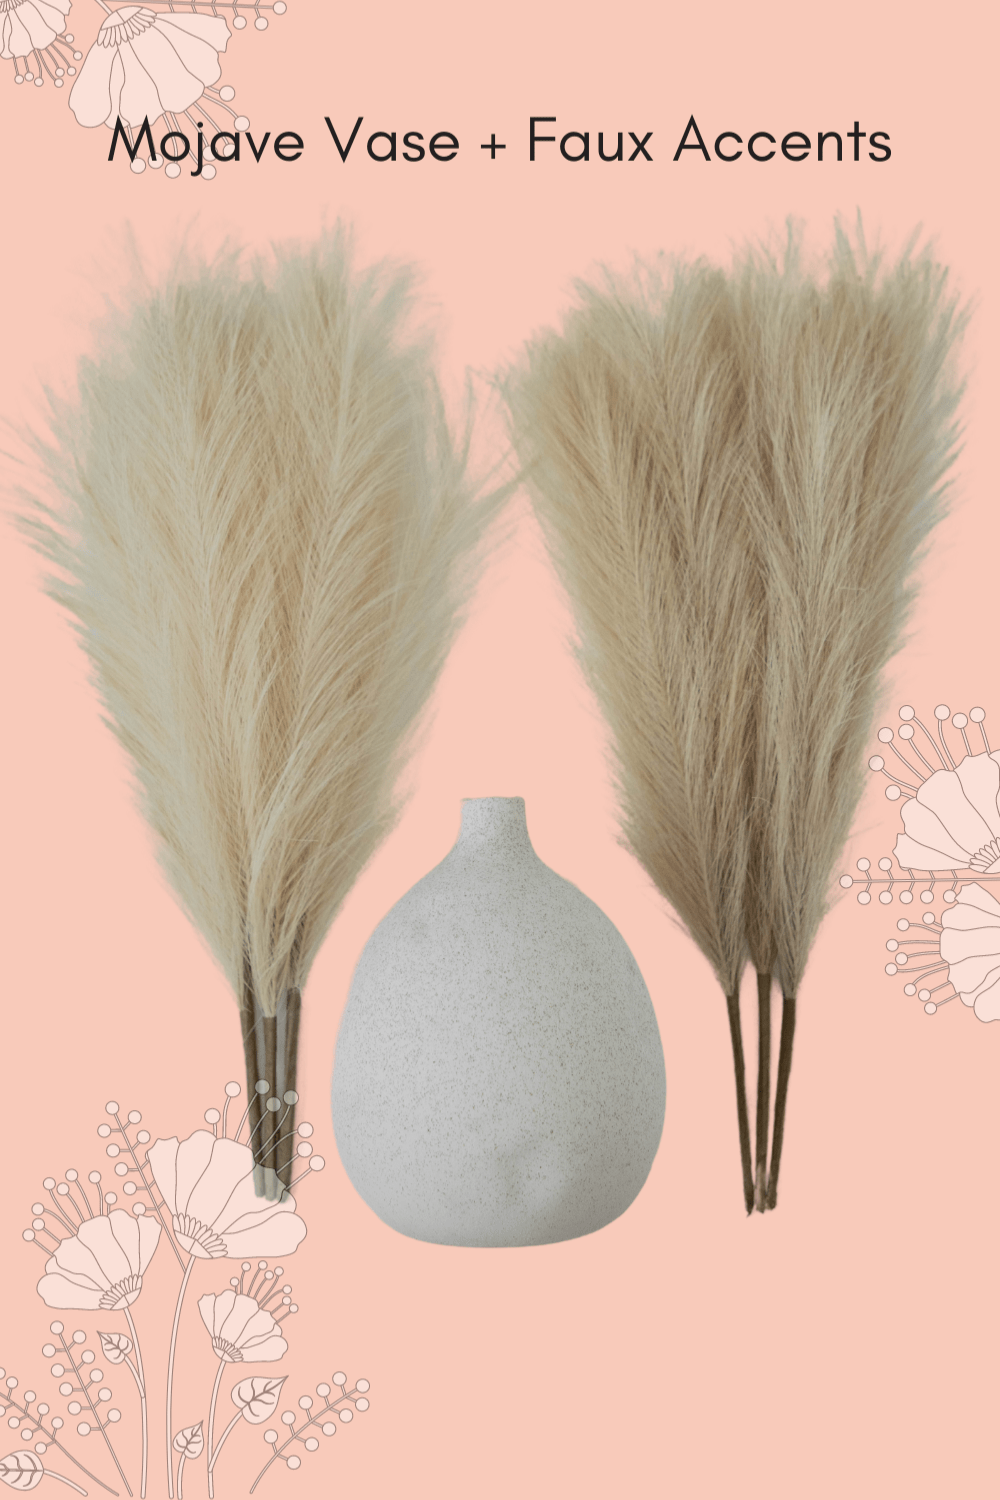 Luxe B "Faux" Accent Artificial Pampas Grass in Cream + Mojave Vase Promo Pack - Luxe B Pampas Grass  Canada , ships via Canada Post from Edmonton 